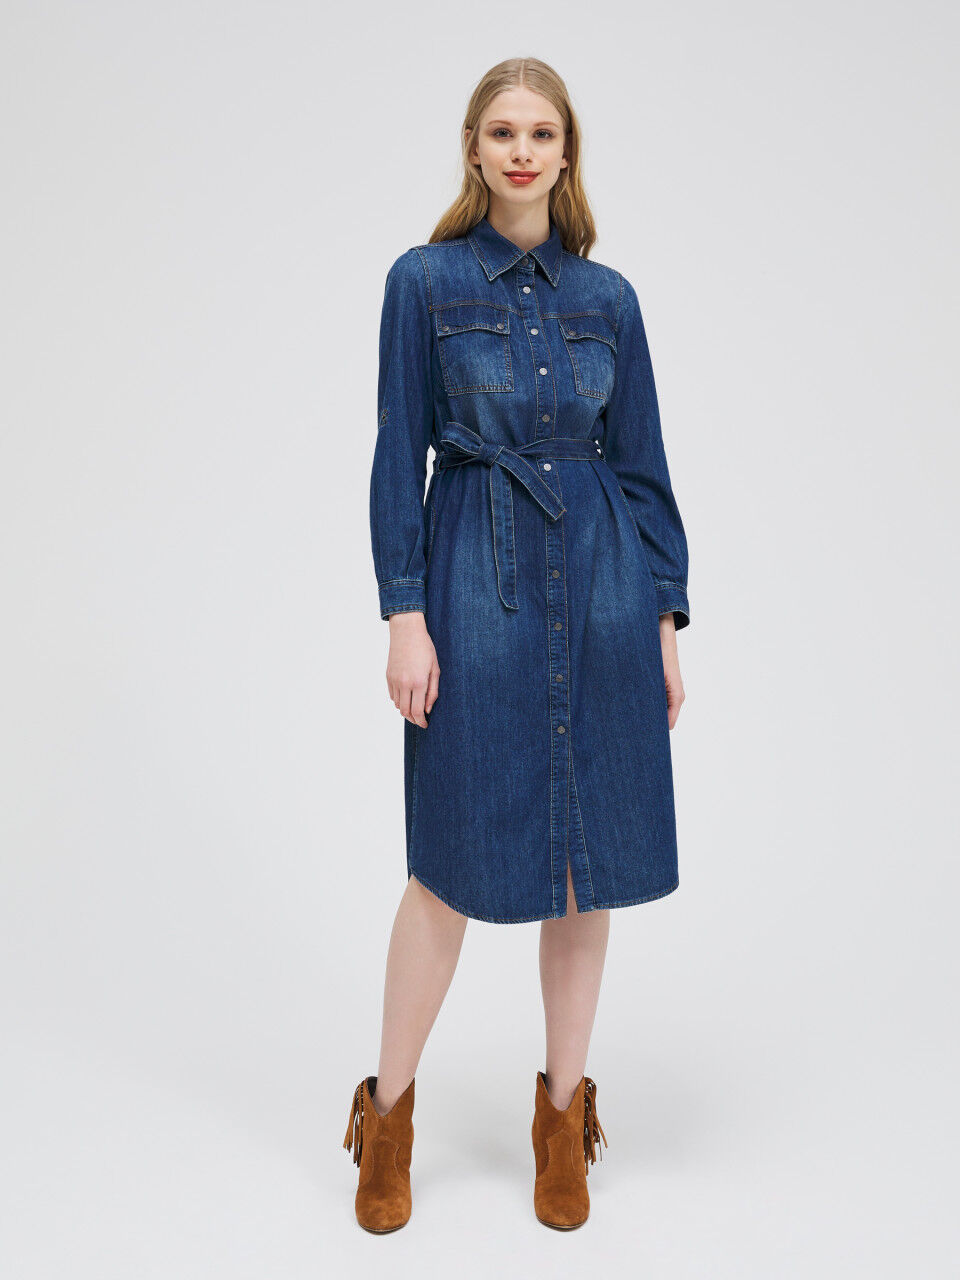 Women's Dresses and Jumpsuits New Collection 2021 | Sisley